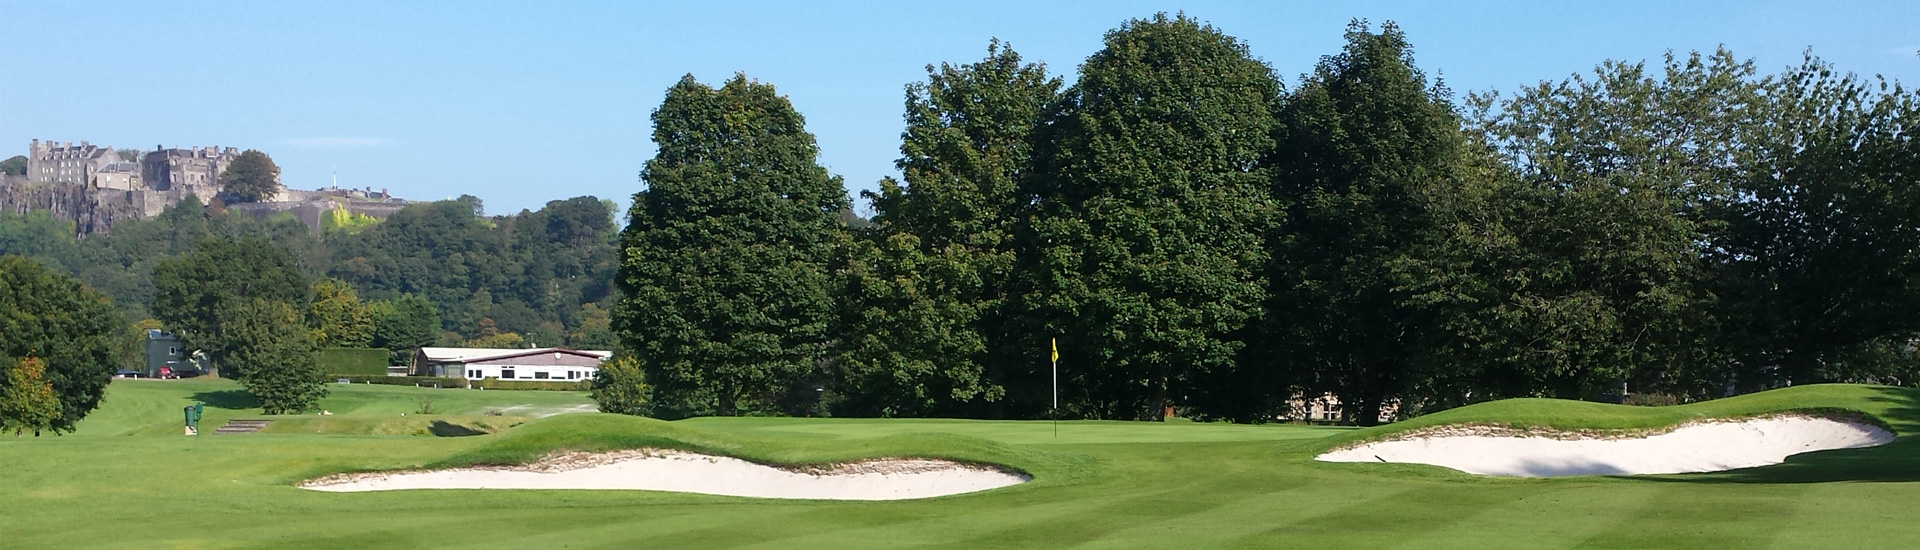 Welcome to Stirling Golf Club – one of the oldest and most picturesque courses in Scotland.